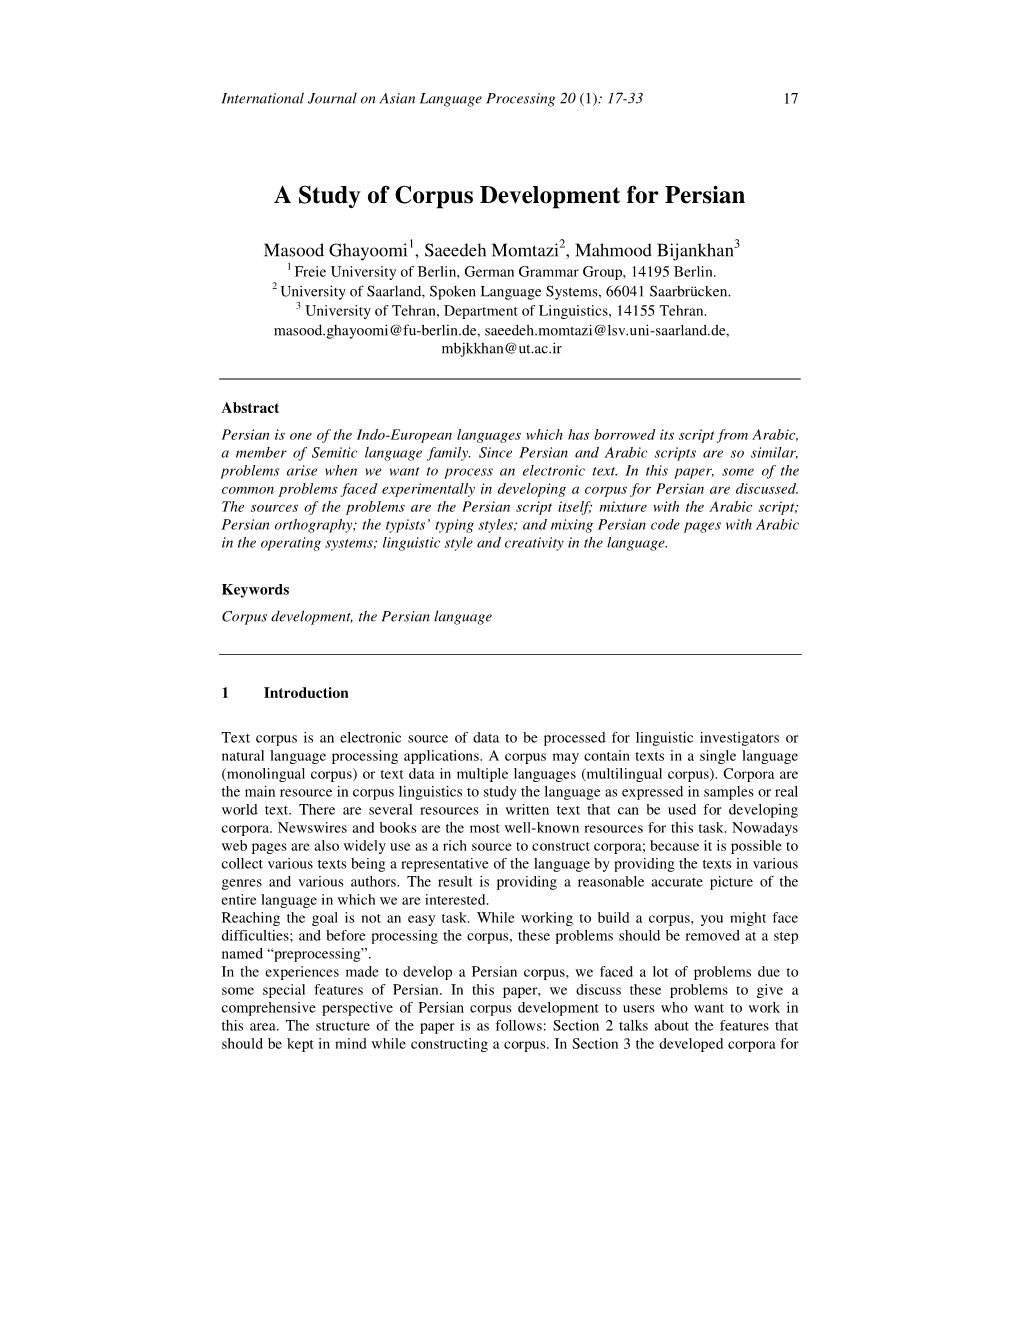 A Study of Corpus Development for Persian